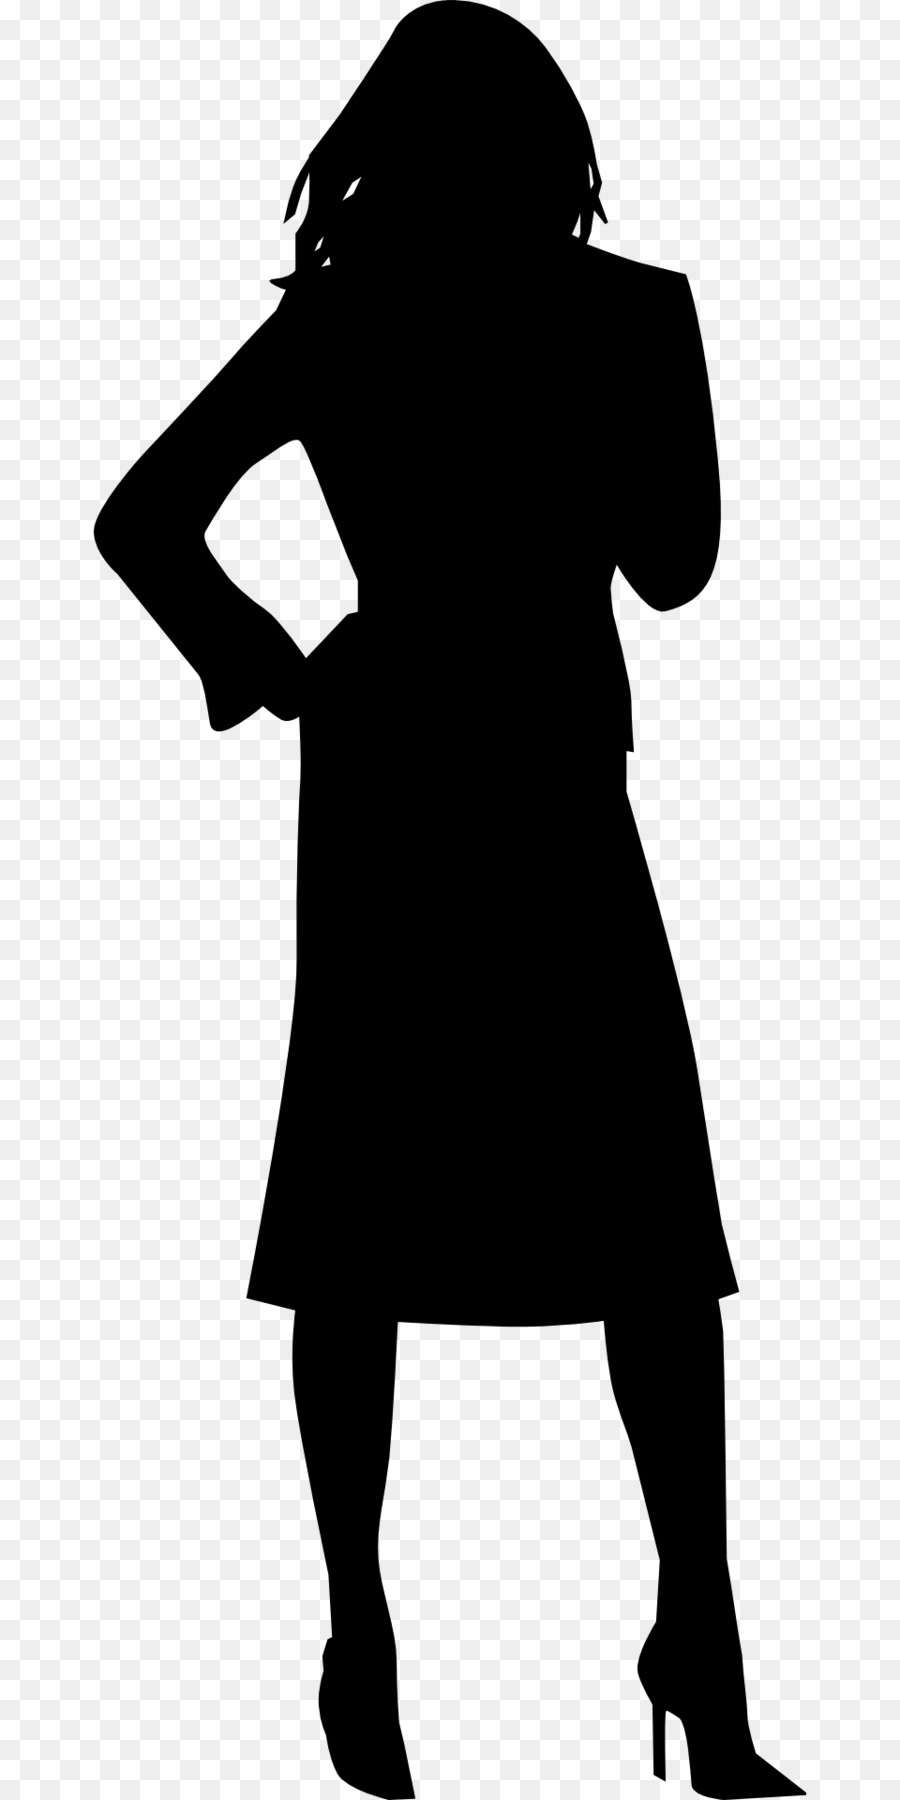 Silhouette Woman Drawing Clip art - Silhouette png download - 960*1920 - Free Transparent Silhouette png Download.